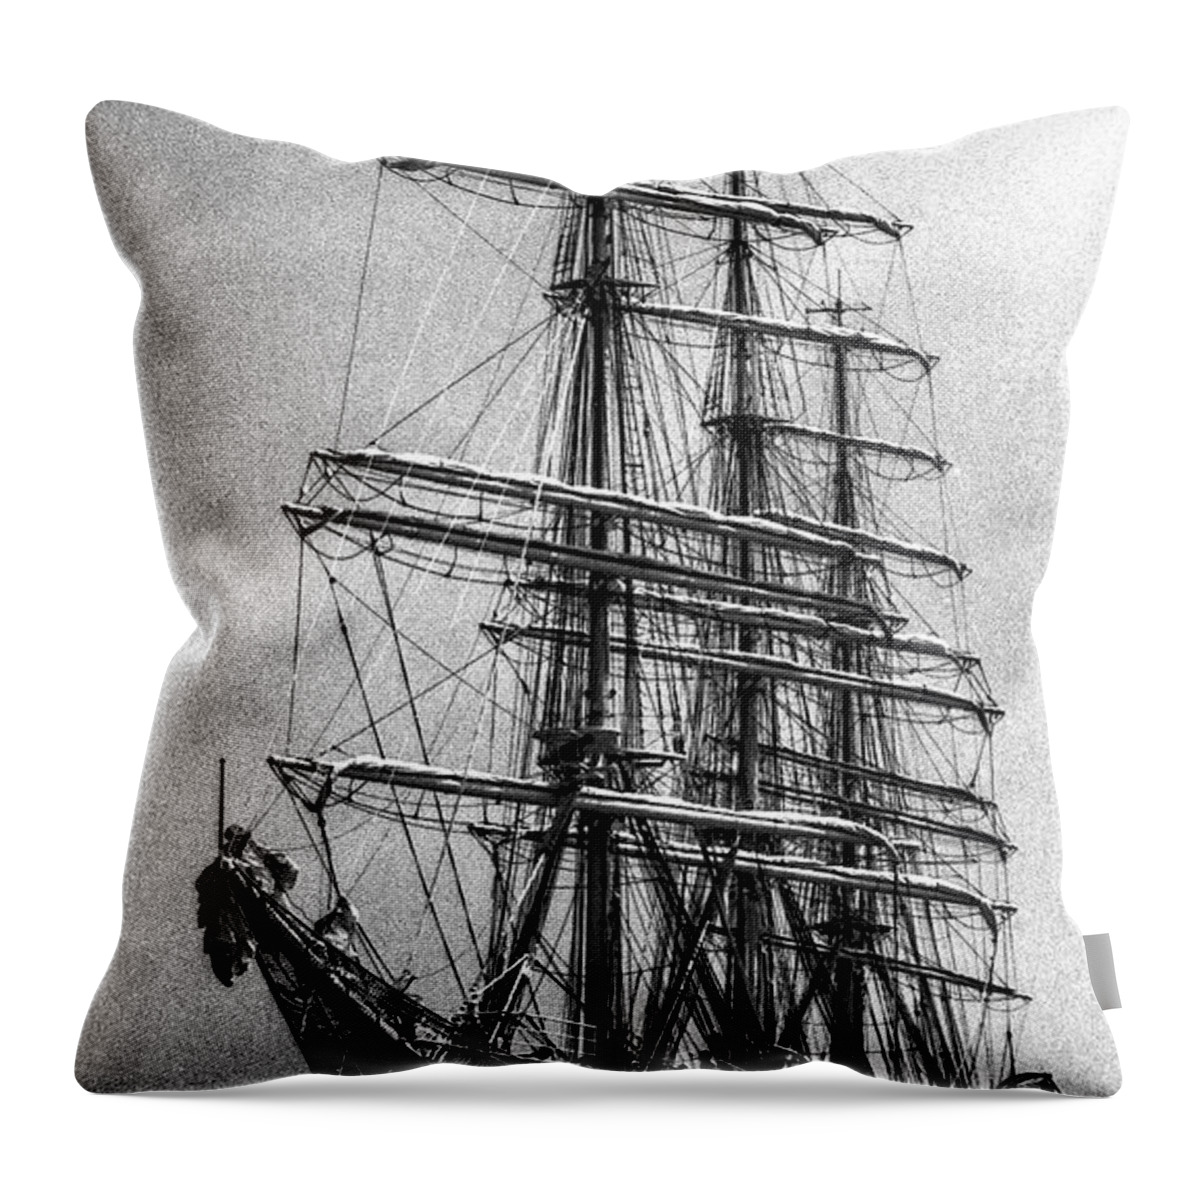 Christian Radich Throw Pillow featuring the photograph Christian Radich by Greg Reed